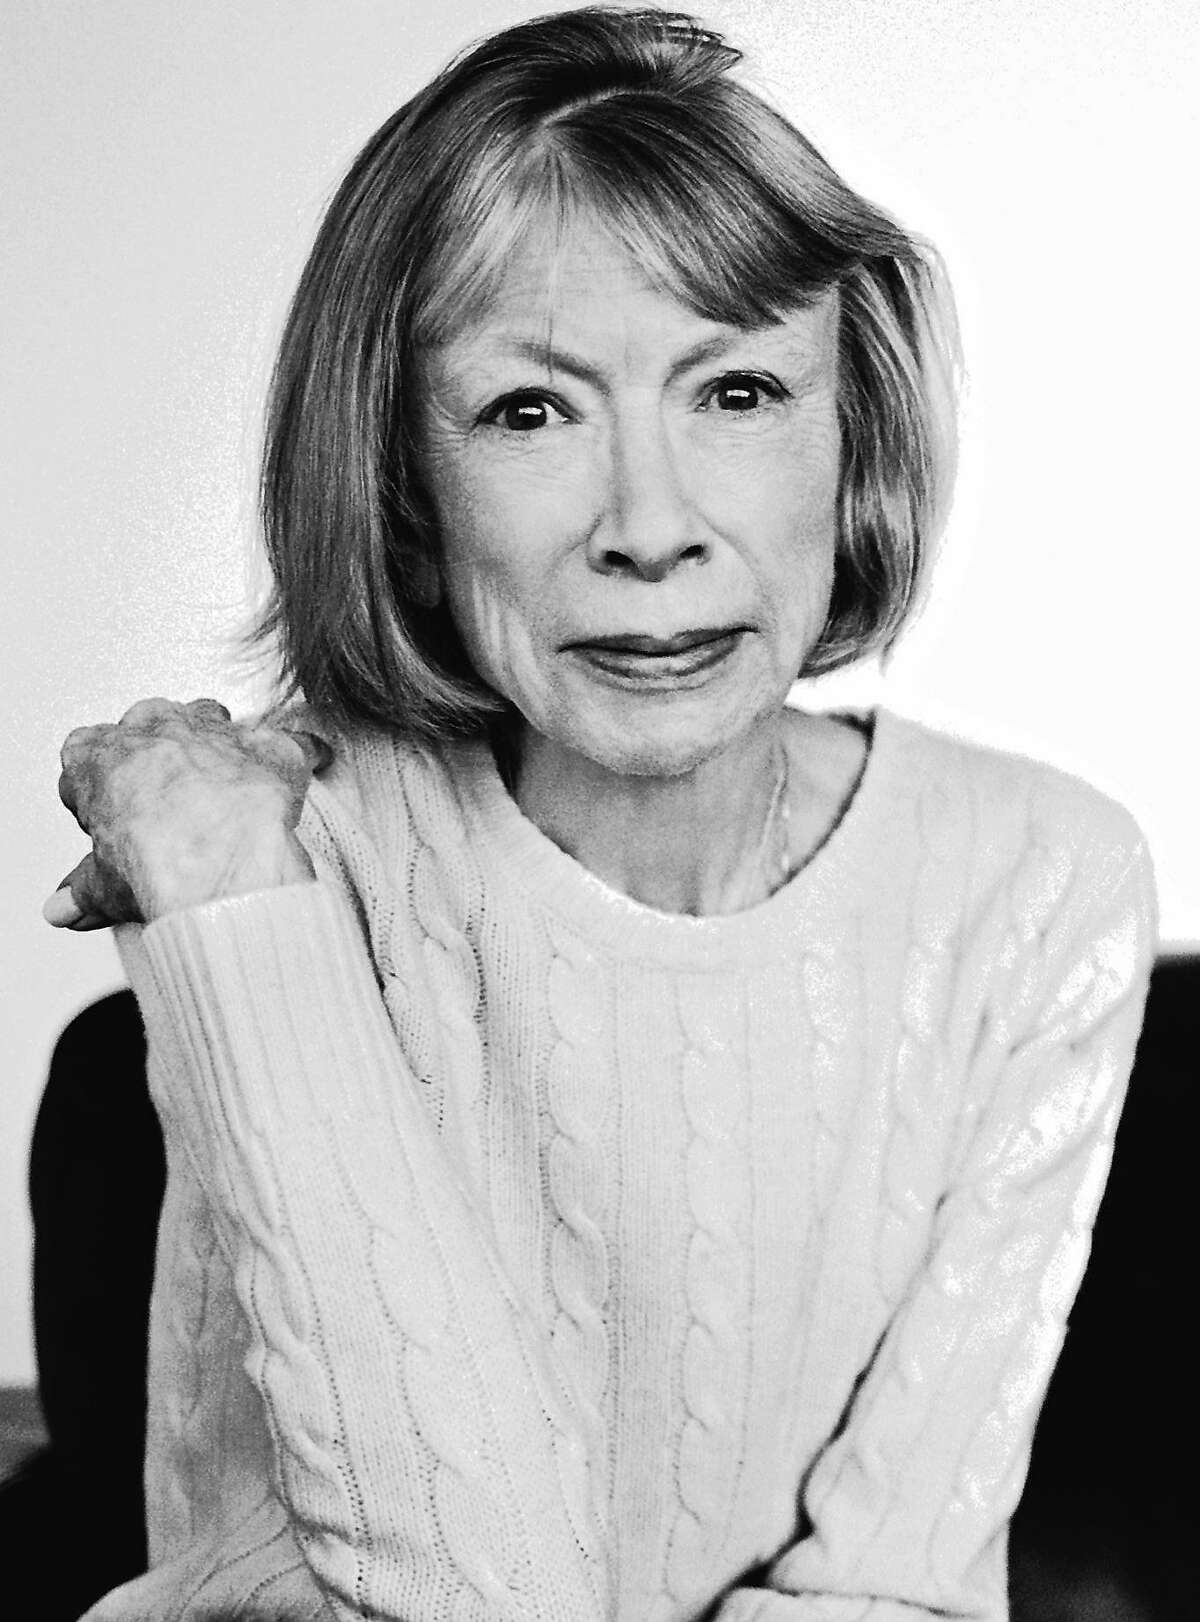 Westport Country Playhouse will host author, essayist and playwright Joan Didion as its guest during a Sunday Symposium on June 17, following the 3 p.m. matinee performance of �The Year of Magical Thinking,� a play based on her memoir.